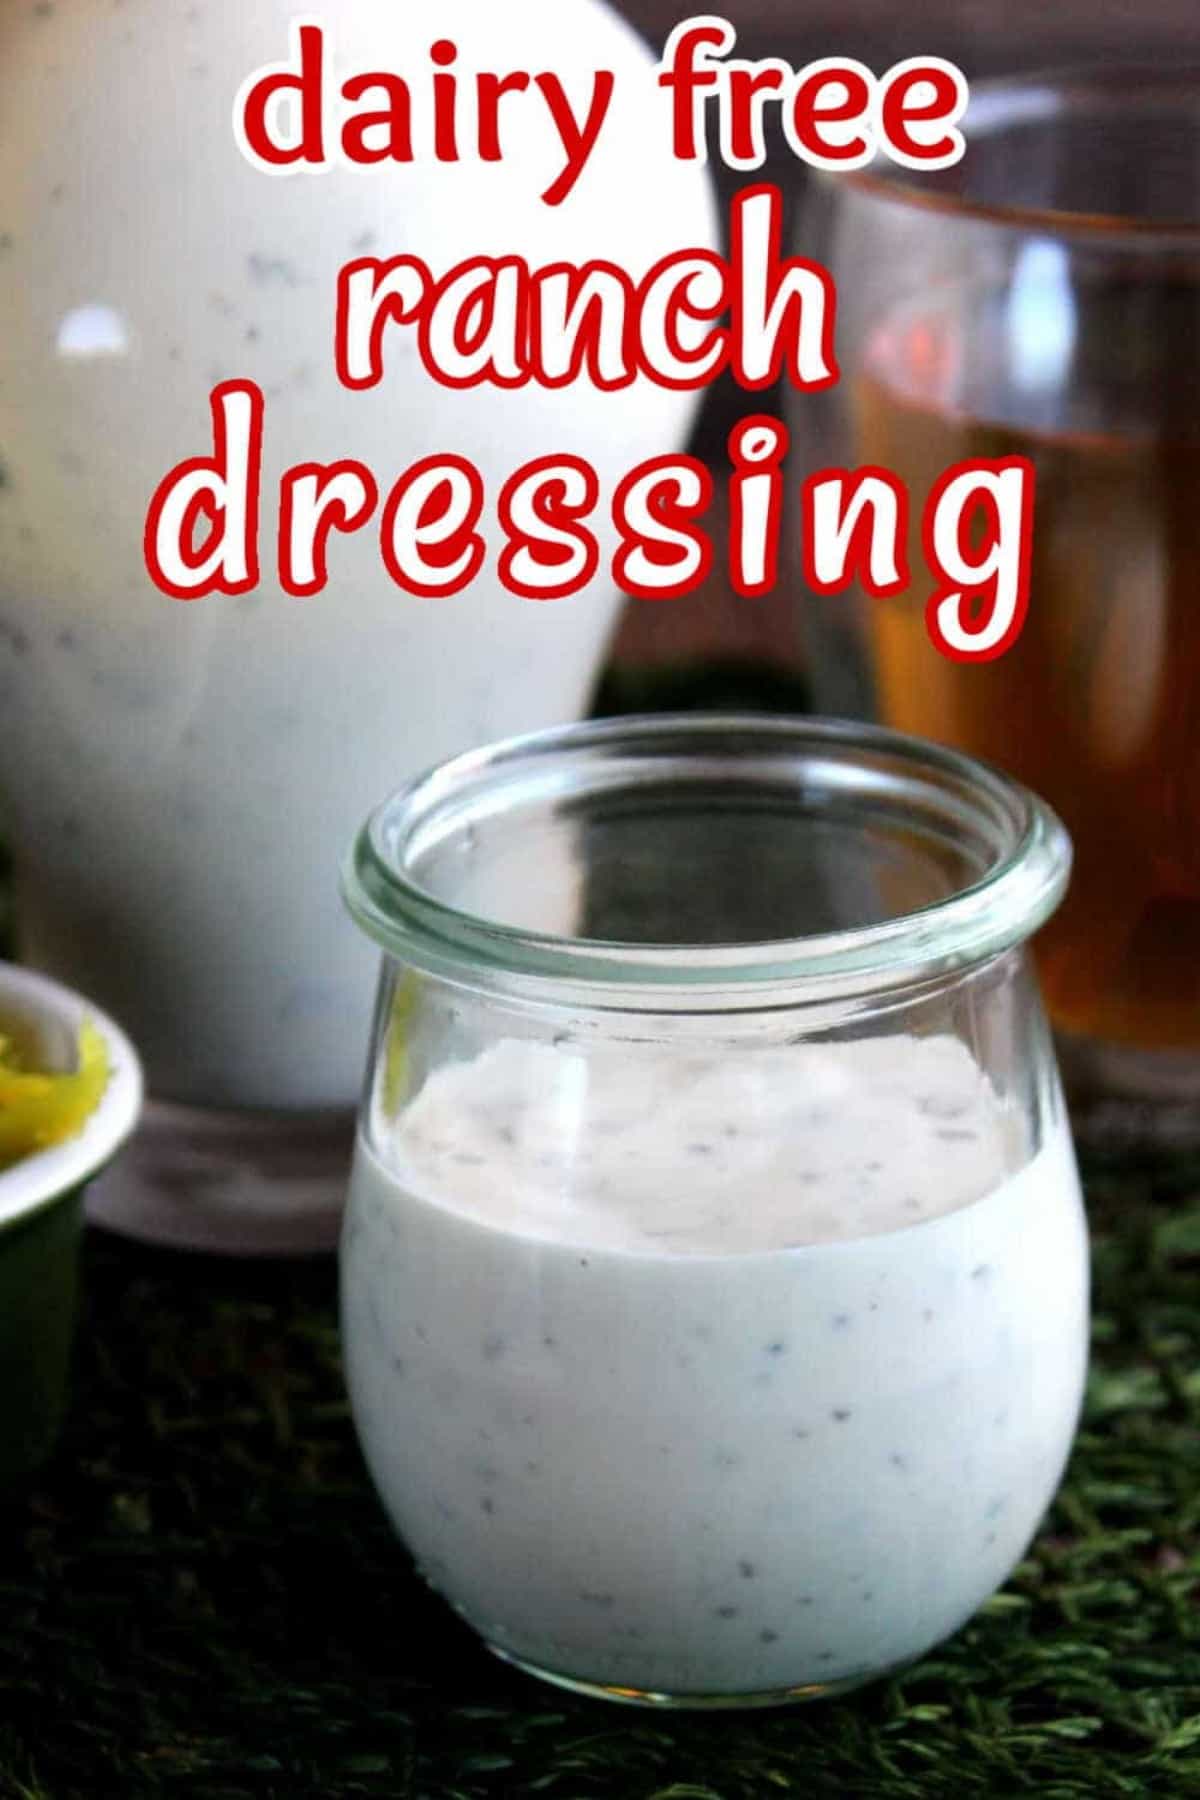 Jar of ranch dressing in front of a jug full. Red text above for pinterest.